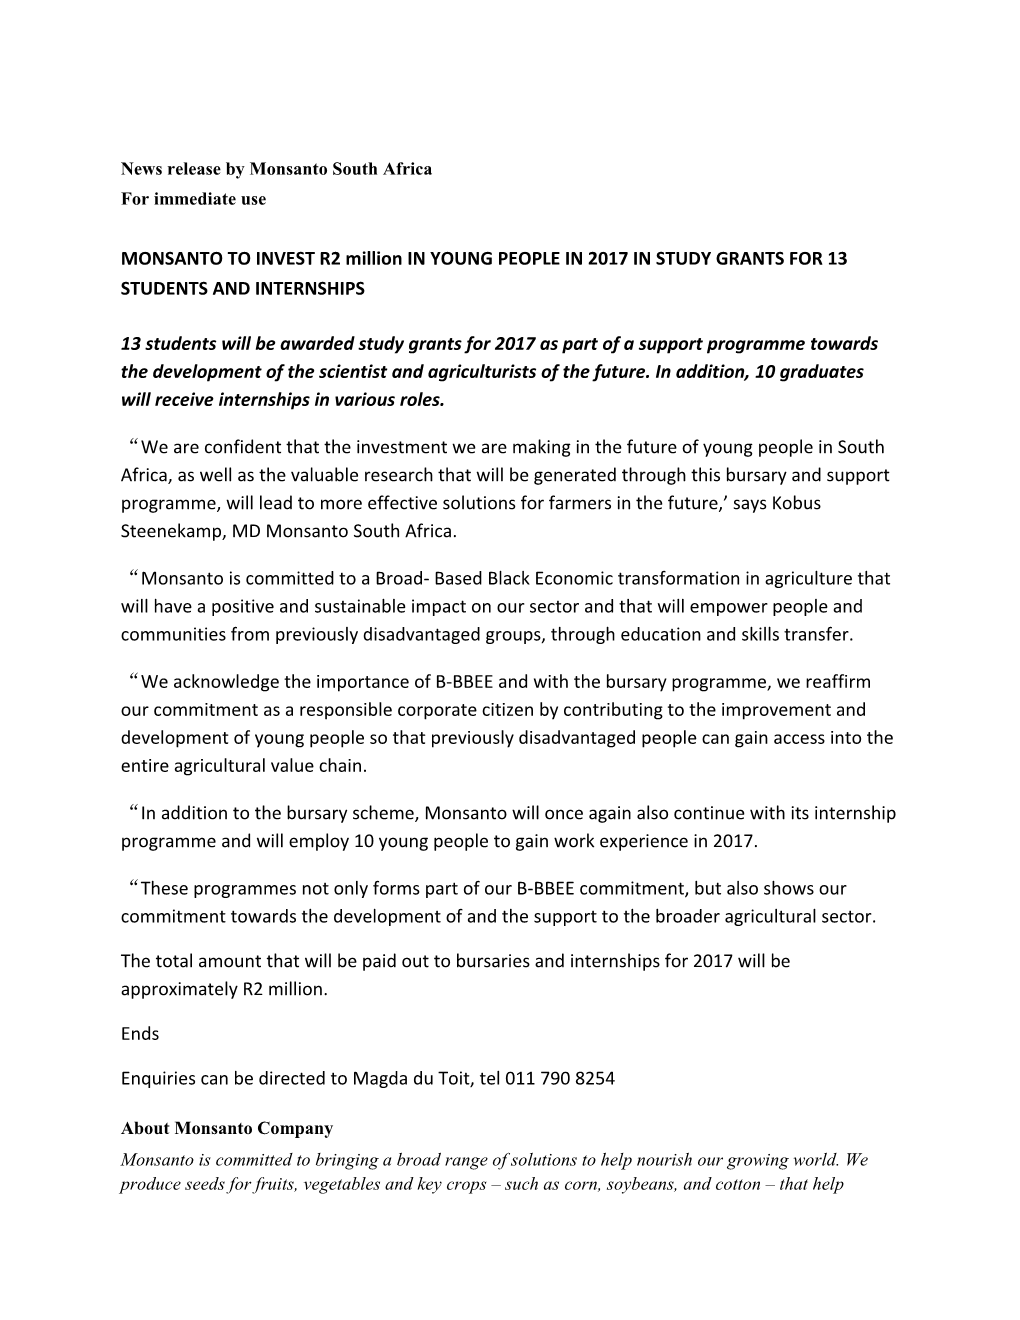 News Release by Monsanto South Africa